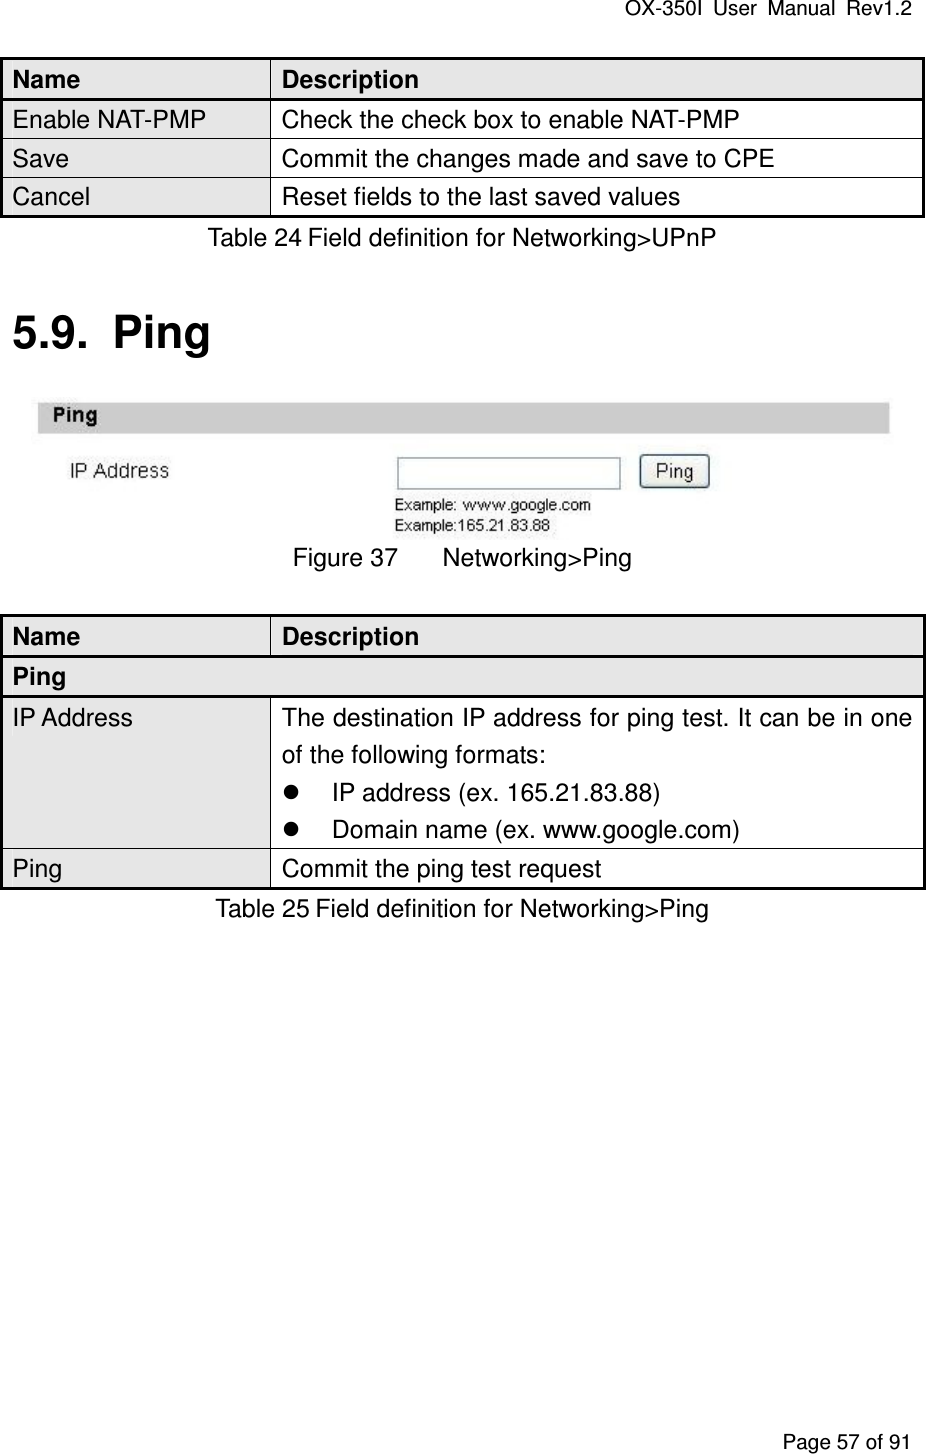 OX-350I  User  Manual  Rev1.2 Page 57 of 91 Name  Description Enable NAT-PMP  Check the check box to enable NAT-PMP Save  Commit the changes made and save to CPE Cancel  Reset fields to the last saved values Table 24 Field definition for Networking&gt;UPnP 5.9.  Ping  Figure 37  Networking&gt;Ping Name  Description Ping IP Address  The destination IP address for ping test. It can be in one of the following formats:   IP address (ex. 165.21.83.88)   Domain name (ex. www.google.com) Ping  Commit the ping test request Table 25 Field definition for Networking&gt;Ping 